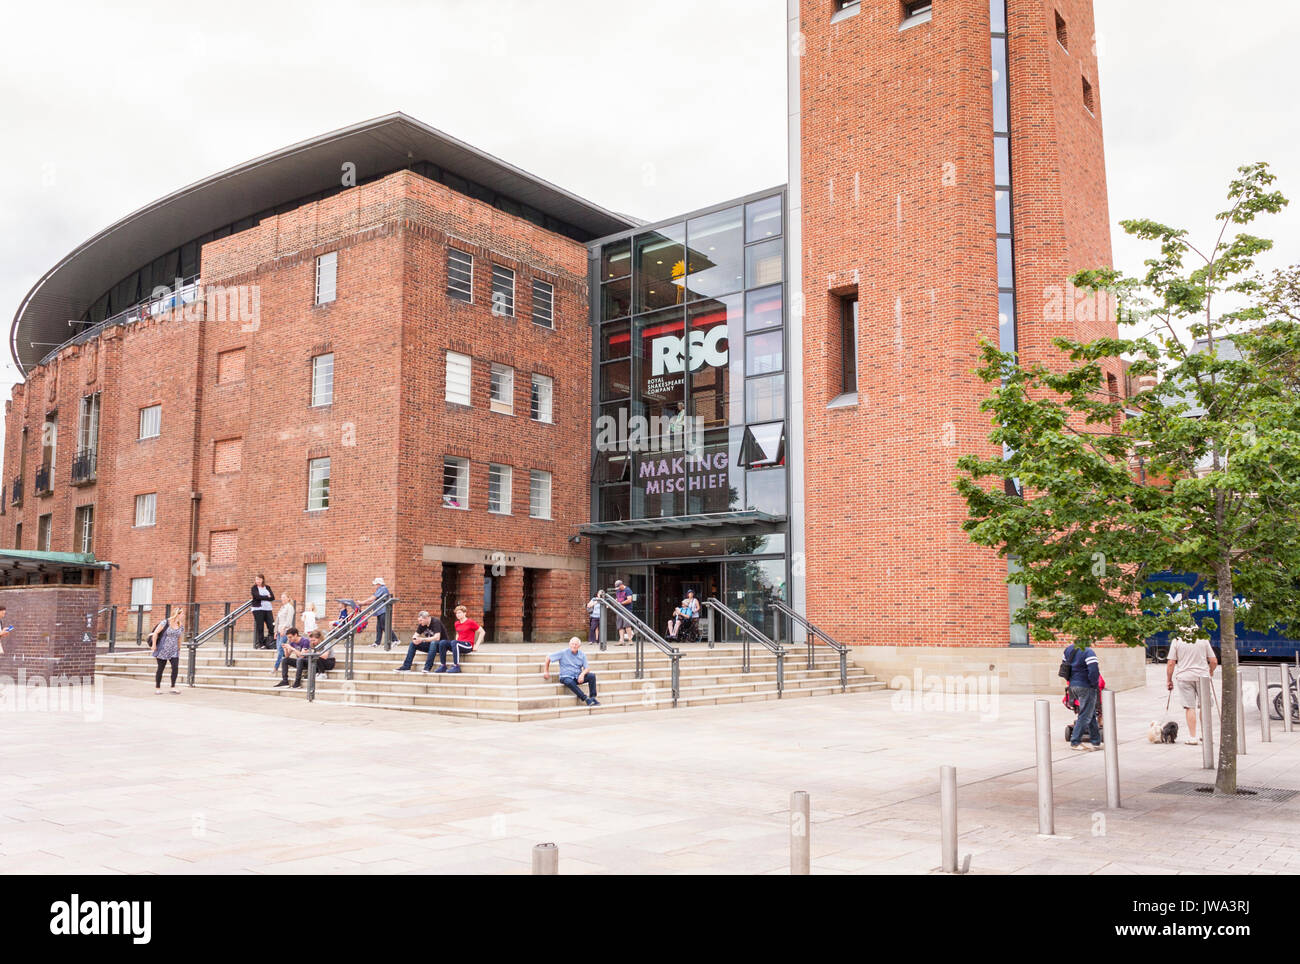 Royal Shakespeare Company Banque D'Images